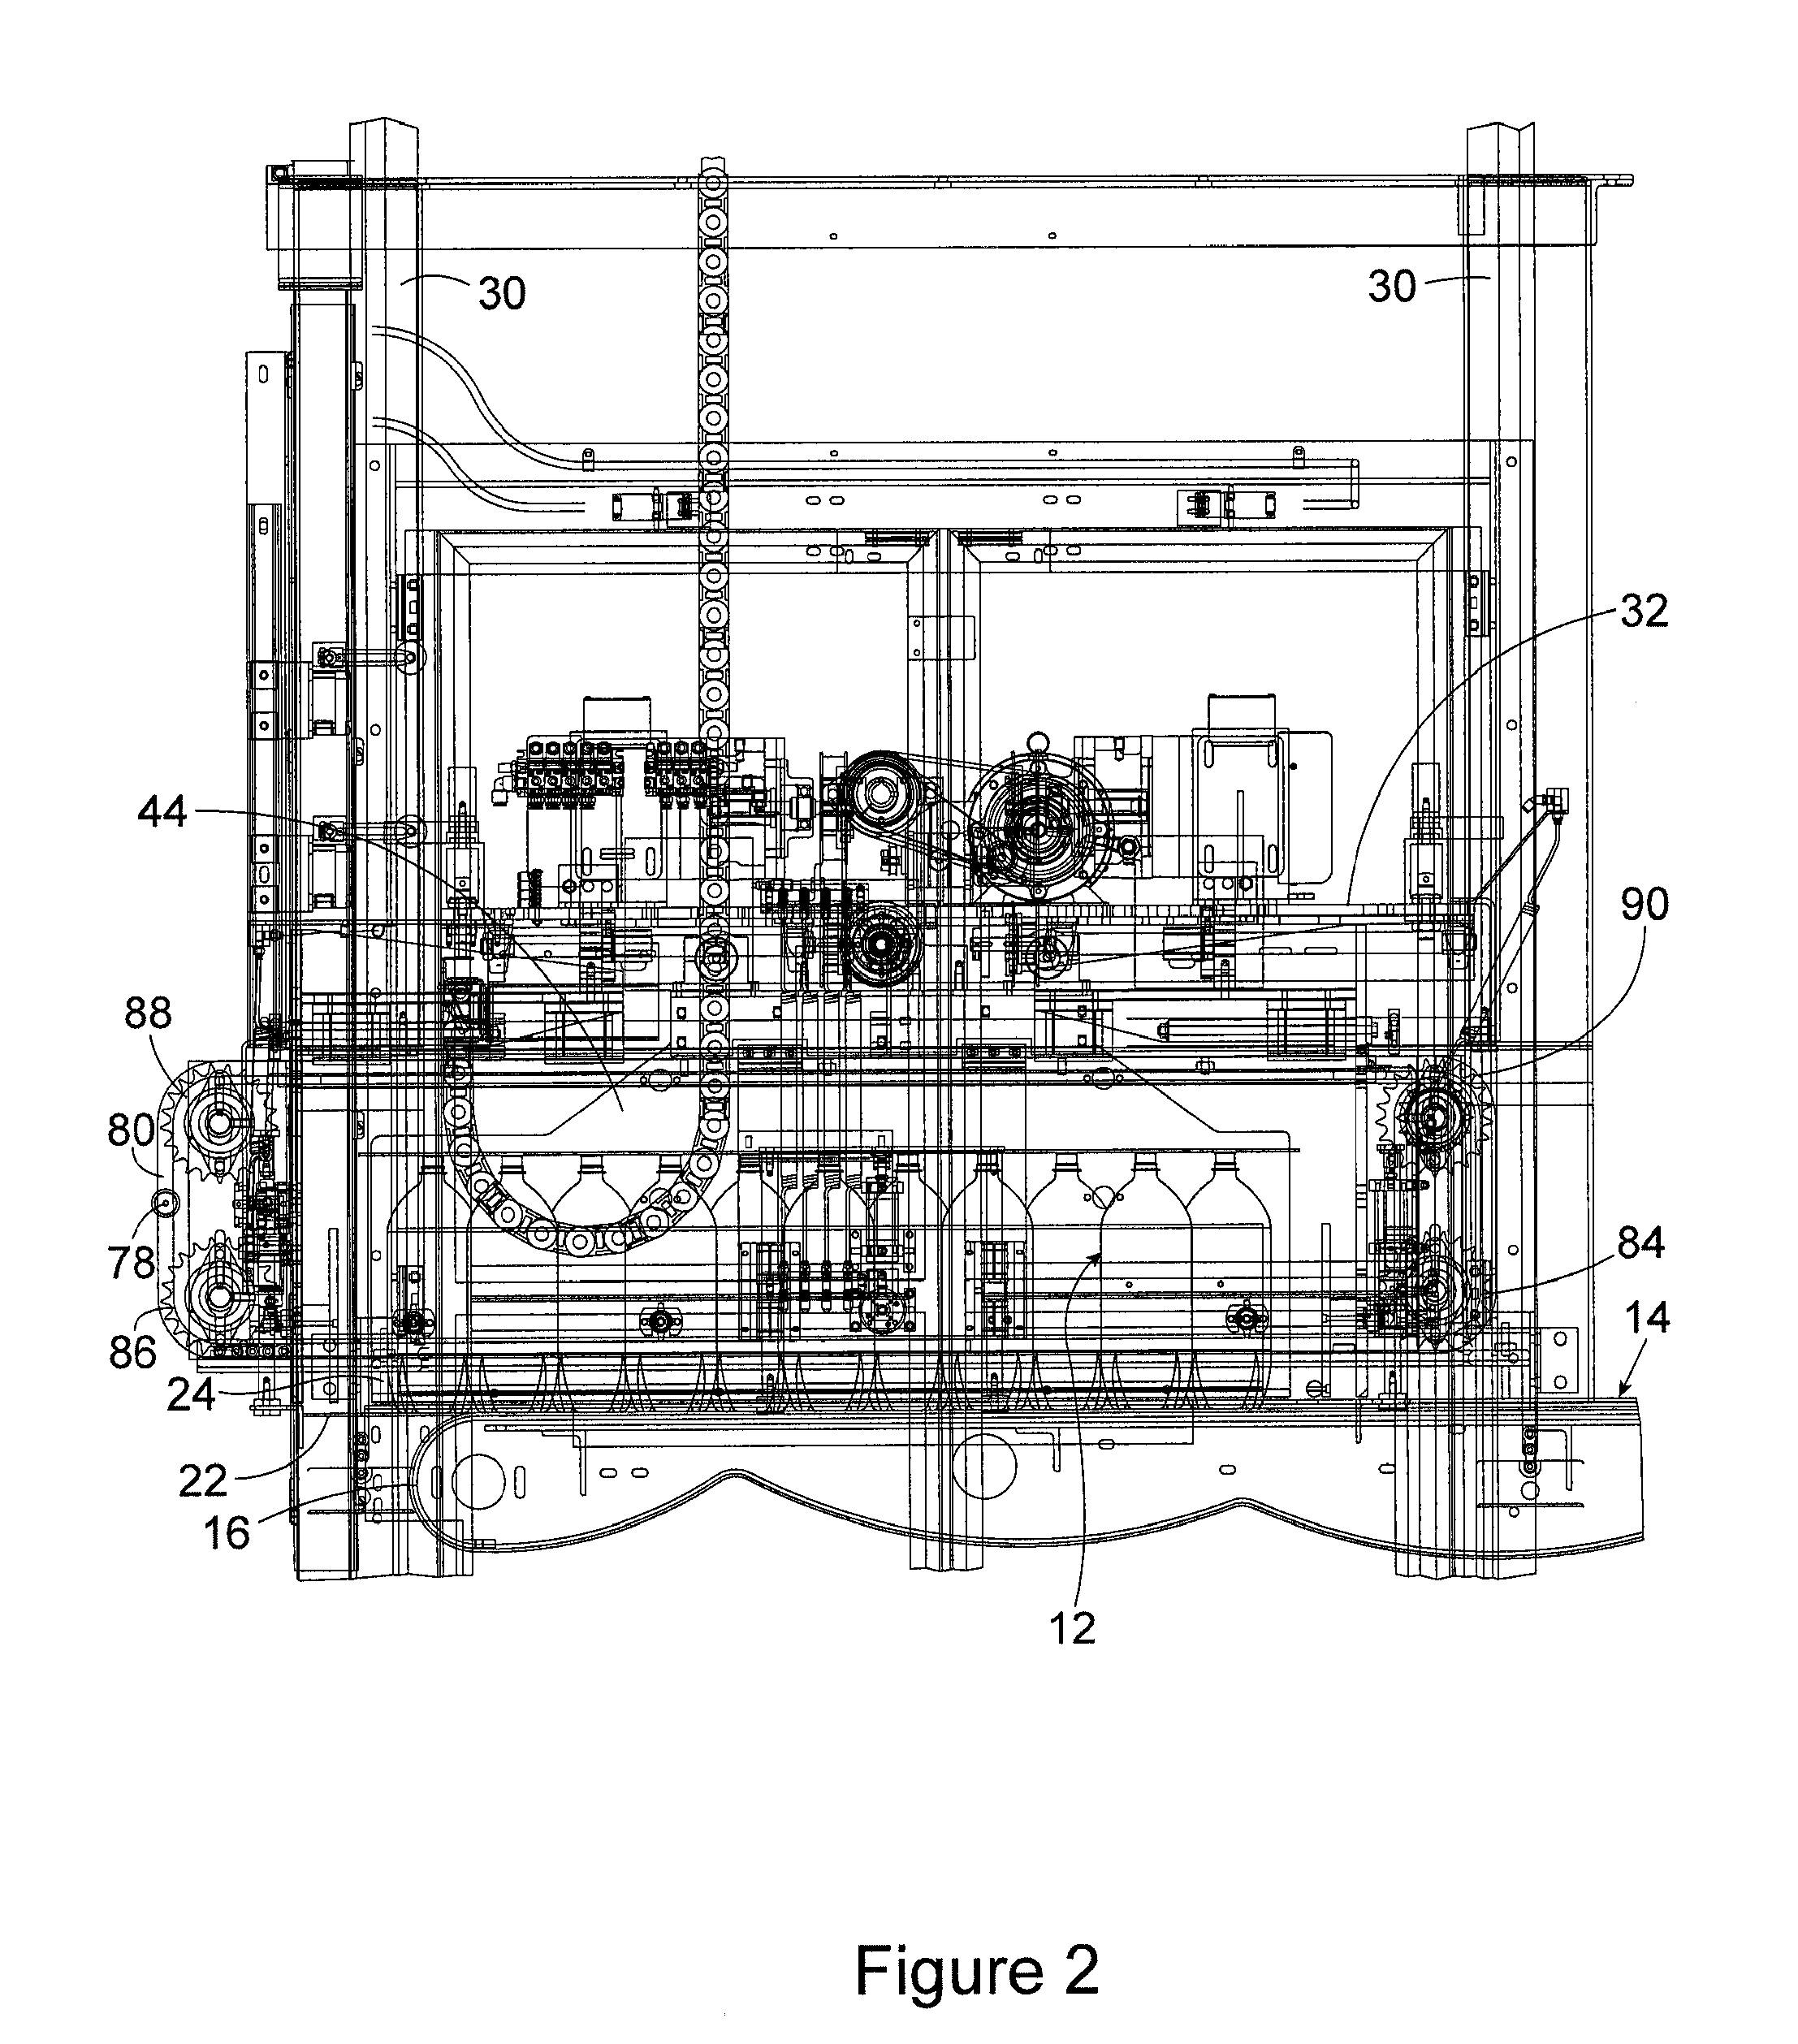 Conveyor System Apparatus for Stacking Arrayed Layers of Objects